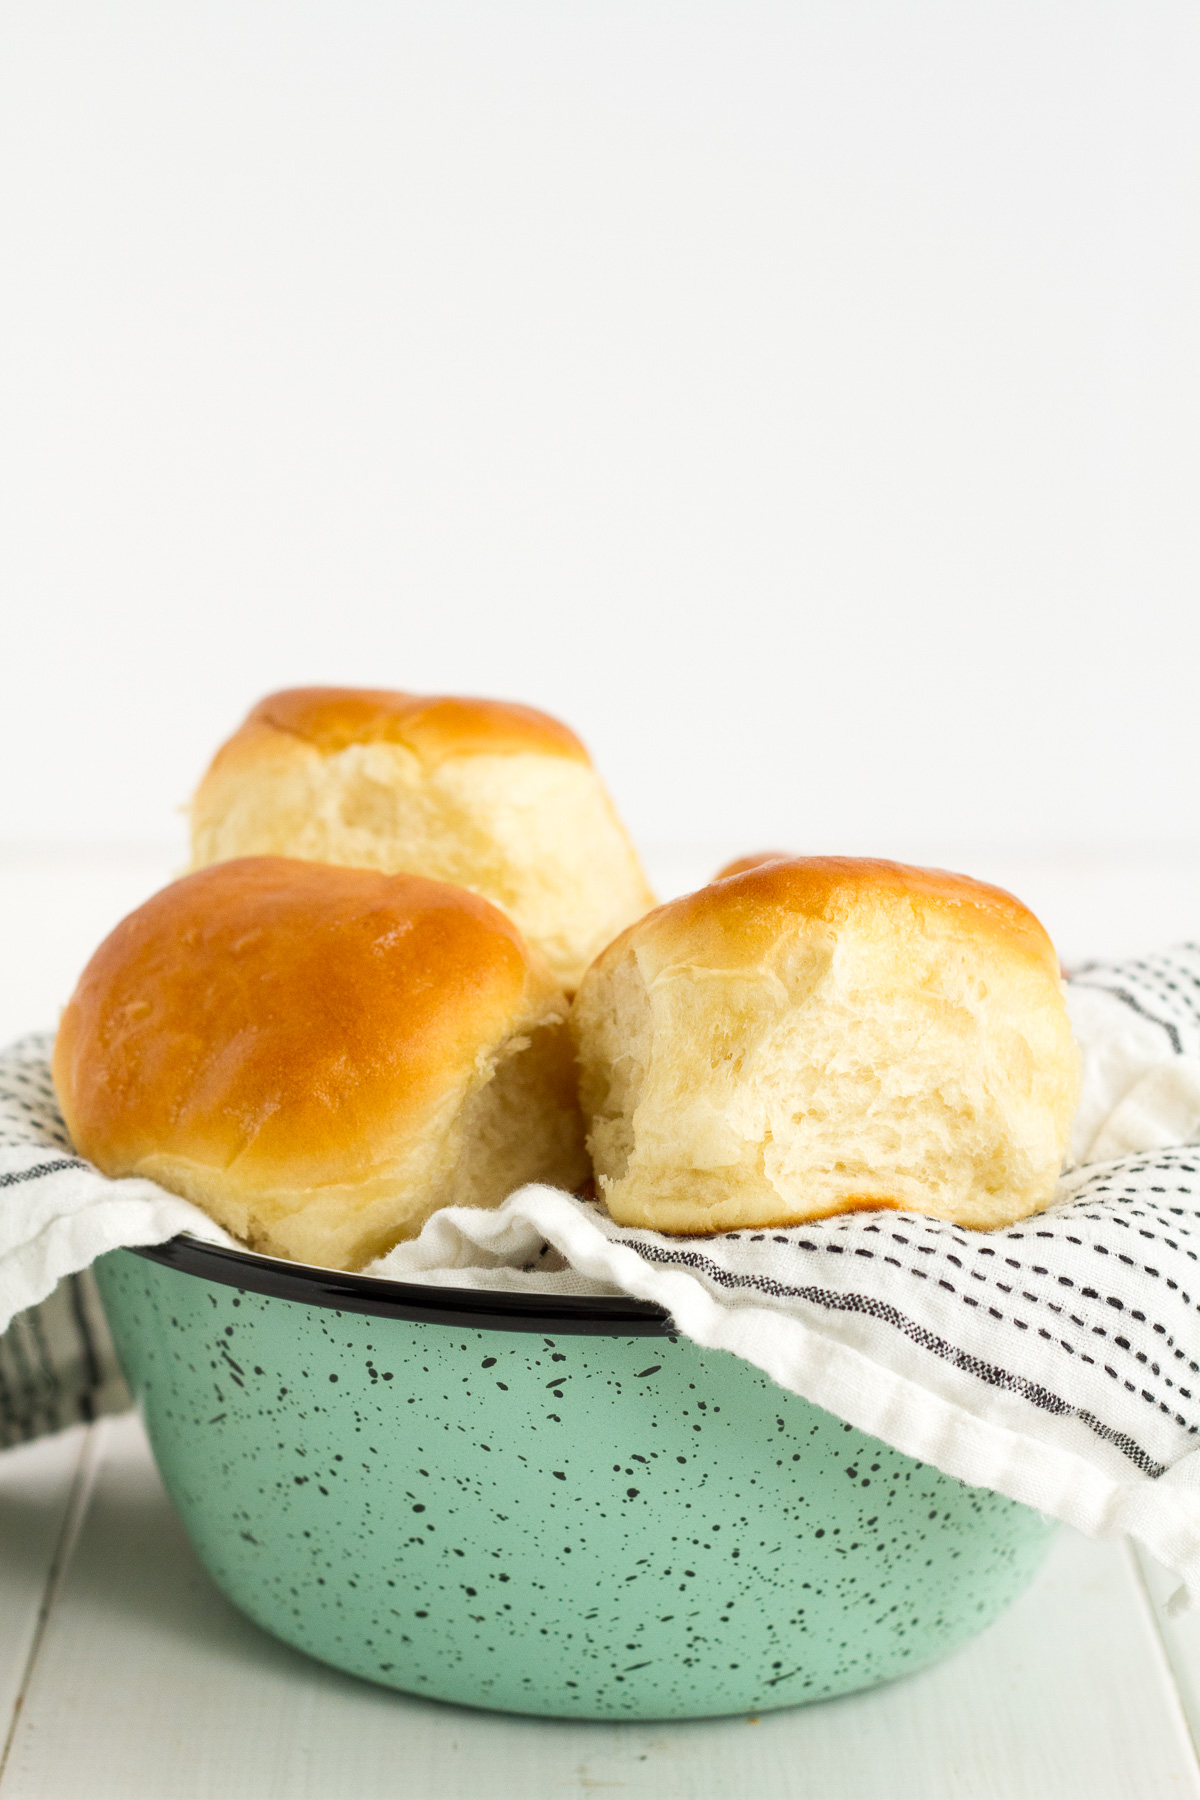 These fluffy dinner rolls are a family favorite! They are perfect for Sunday suppers, family dinners, and special occasions like Thanksgiving, Christmas, and Easter.